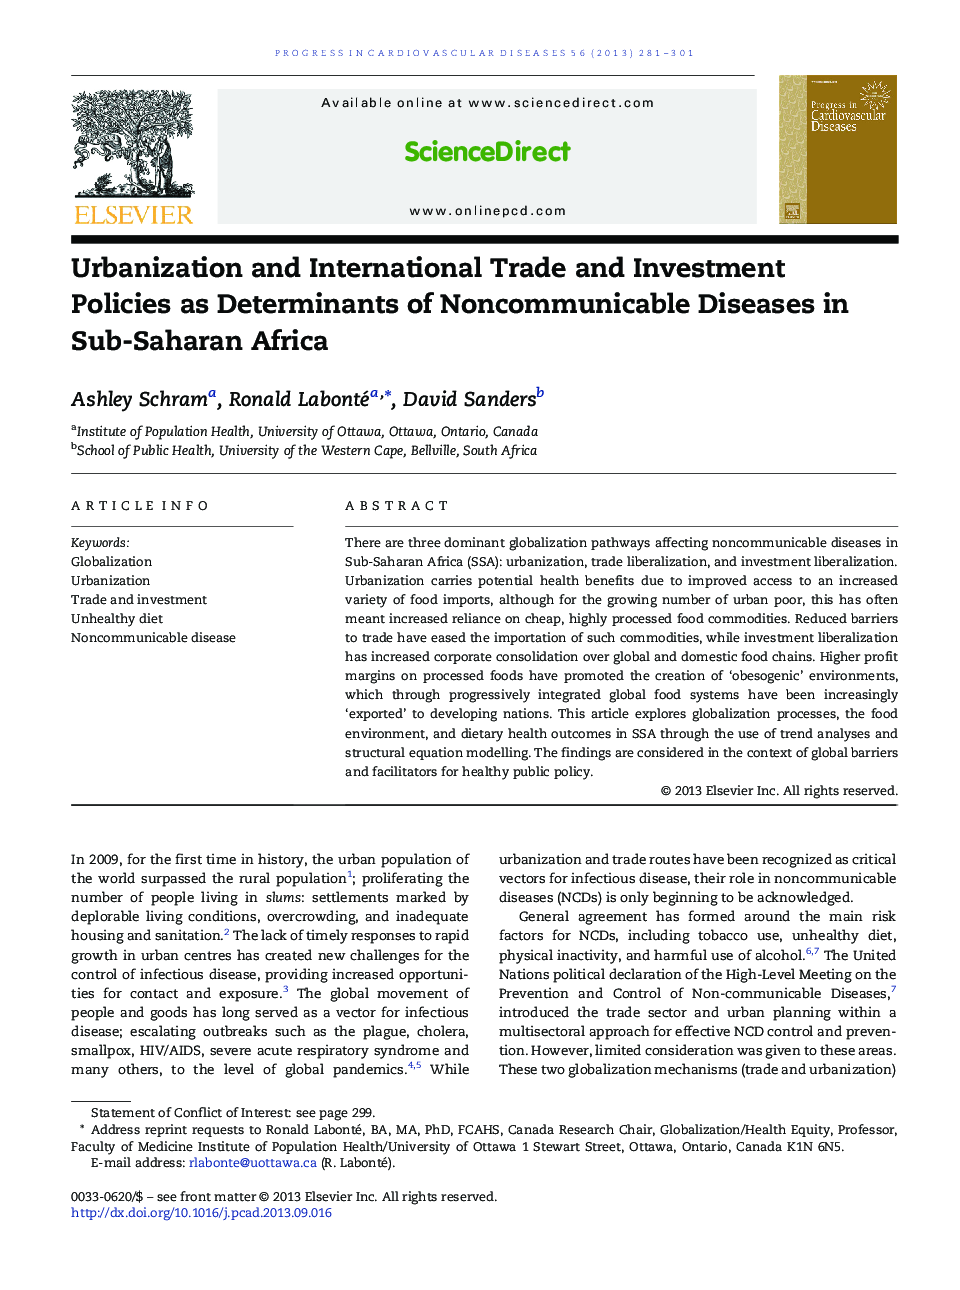 Urbanization and International Trade and Investment Policies as Determinants of Noncommunicable Diseases in Sub-Saharan Africa 